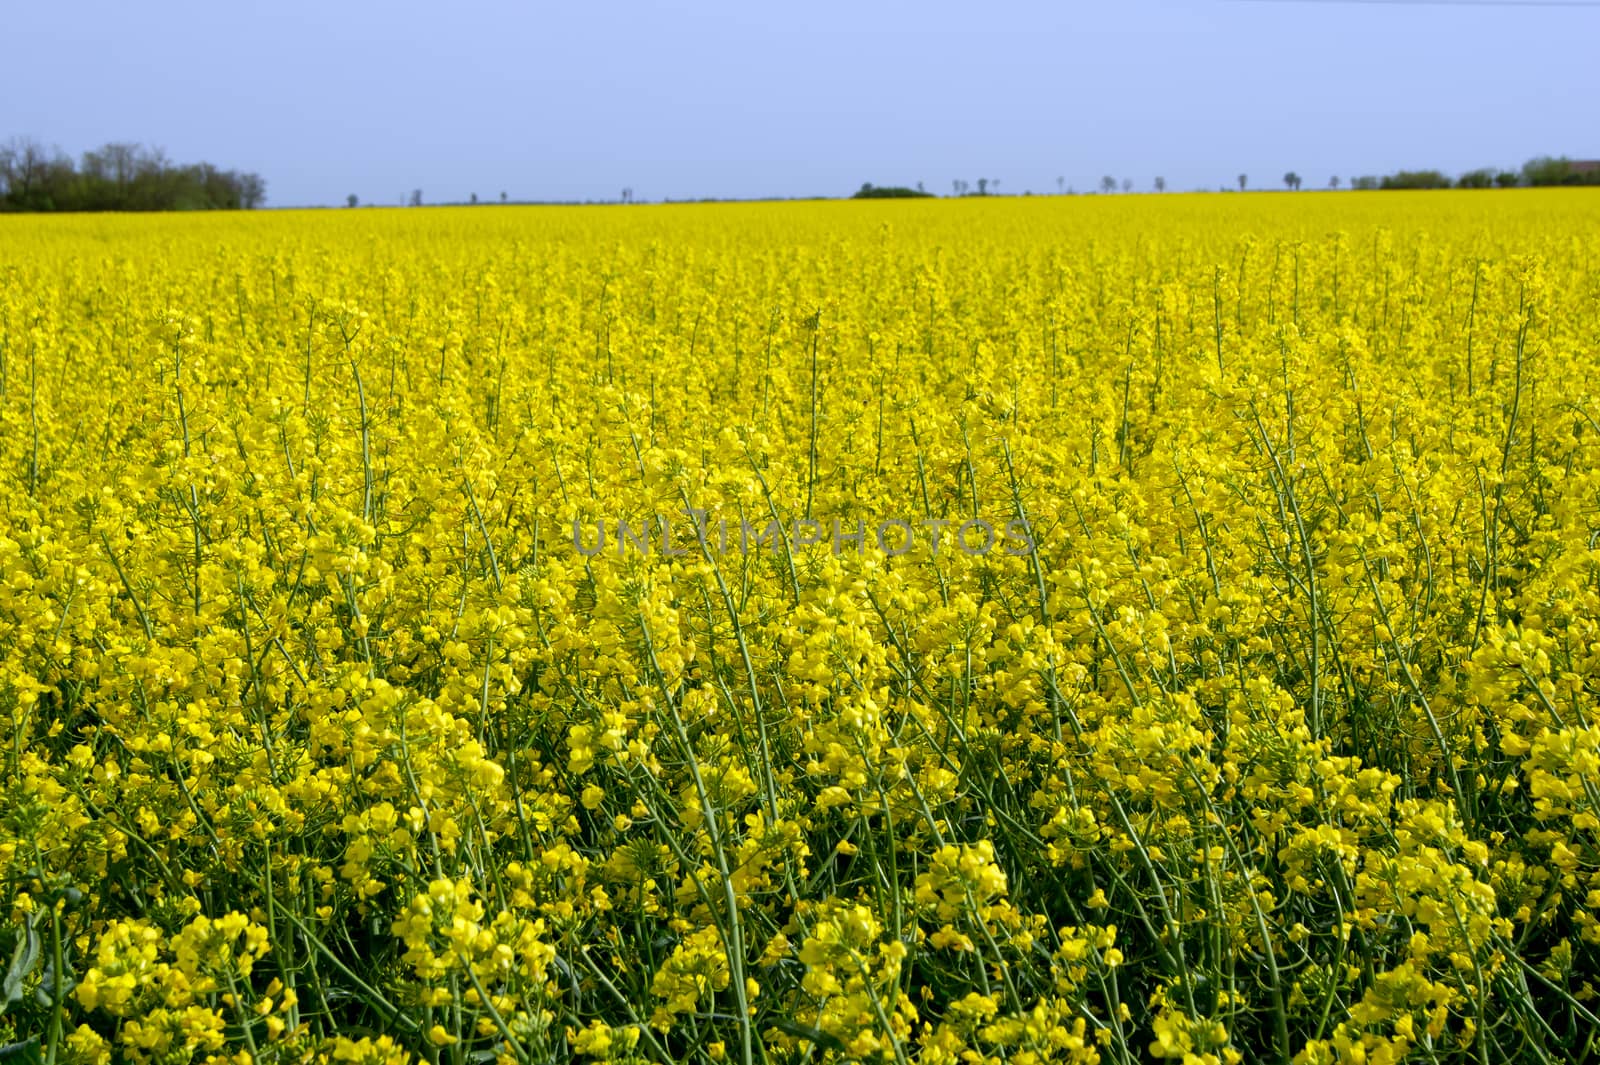 The rapeseed (Brassica napus) field yellow spring.